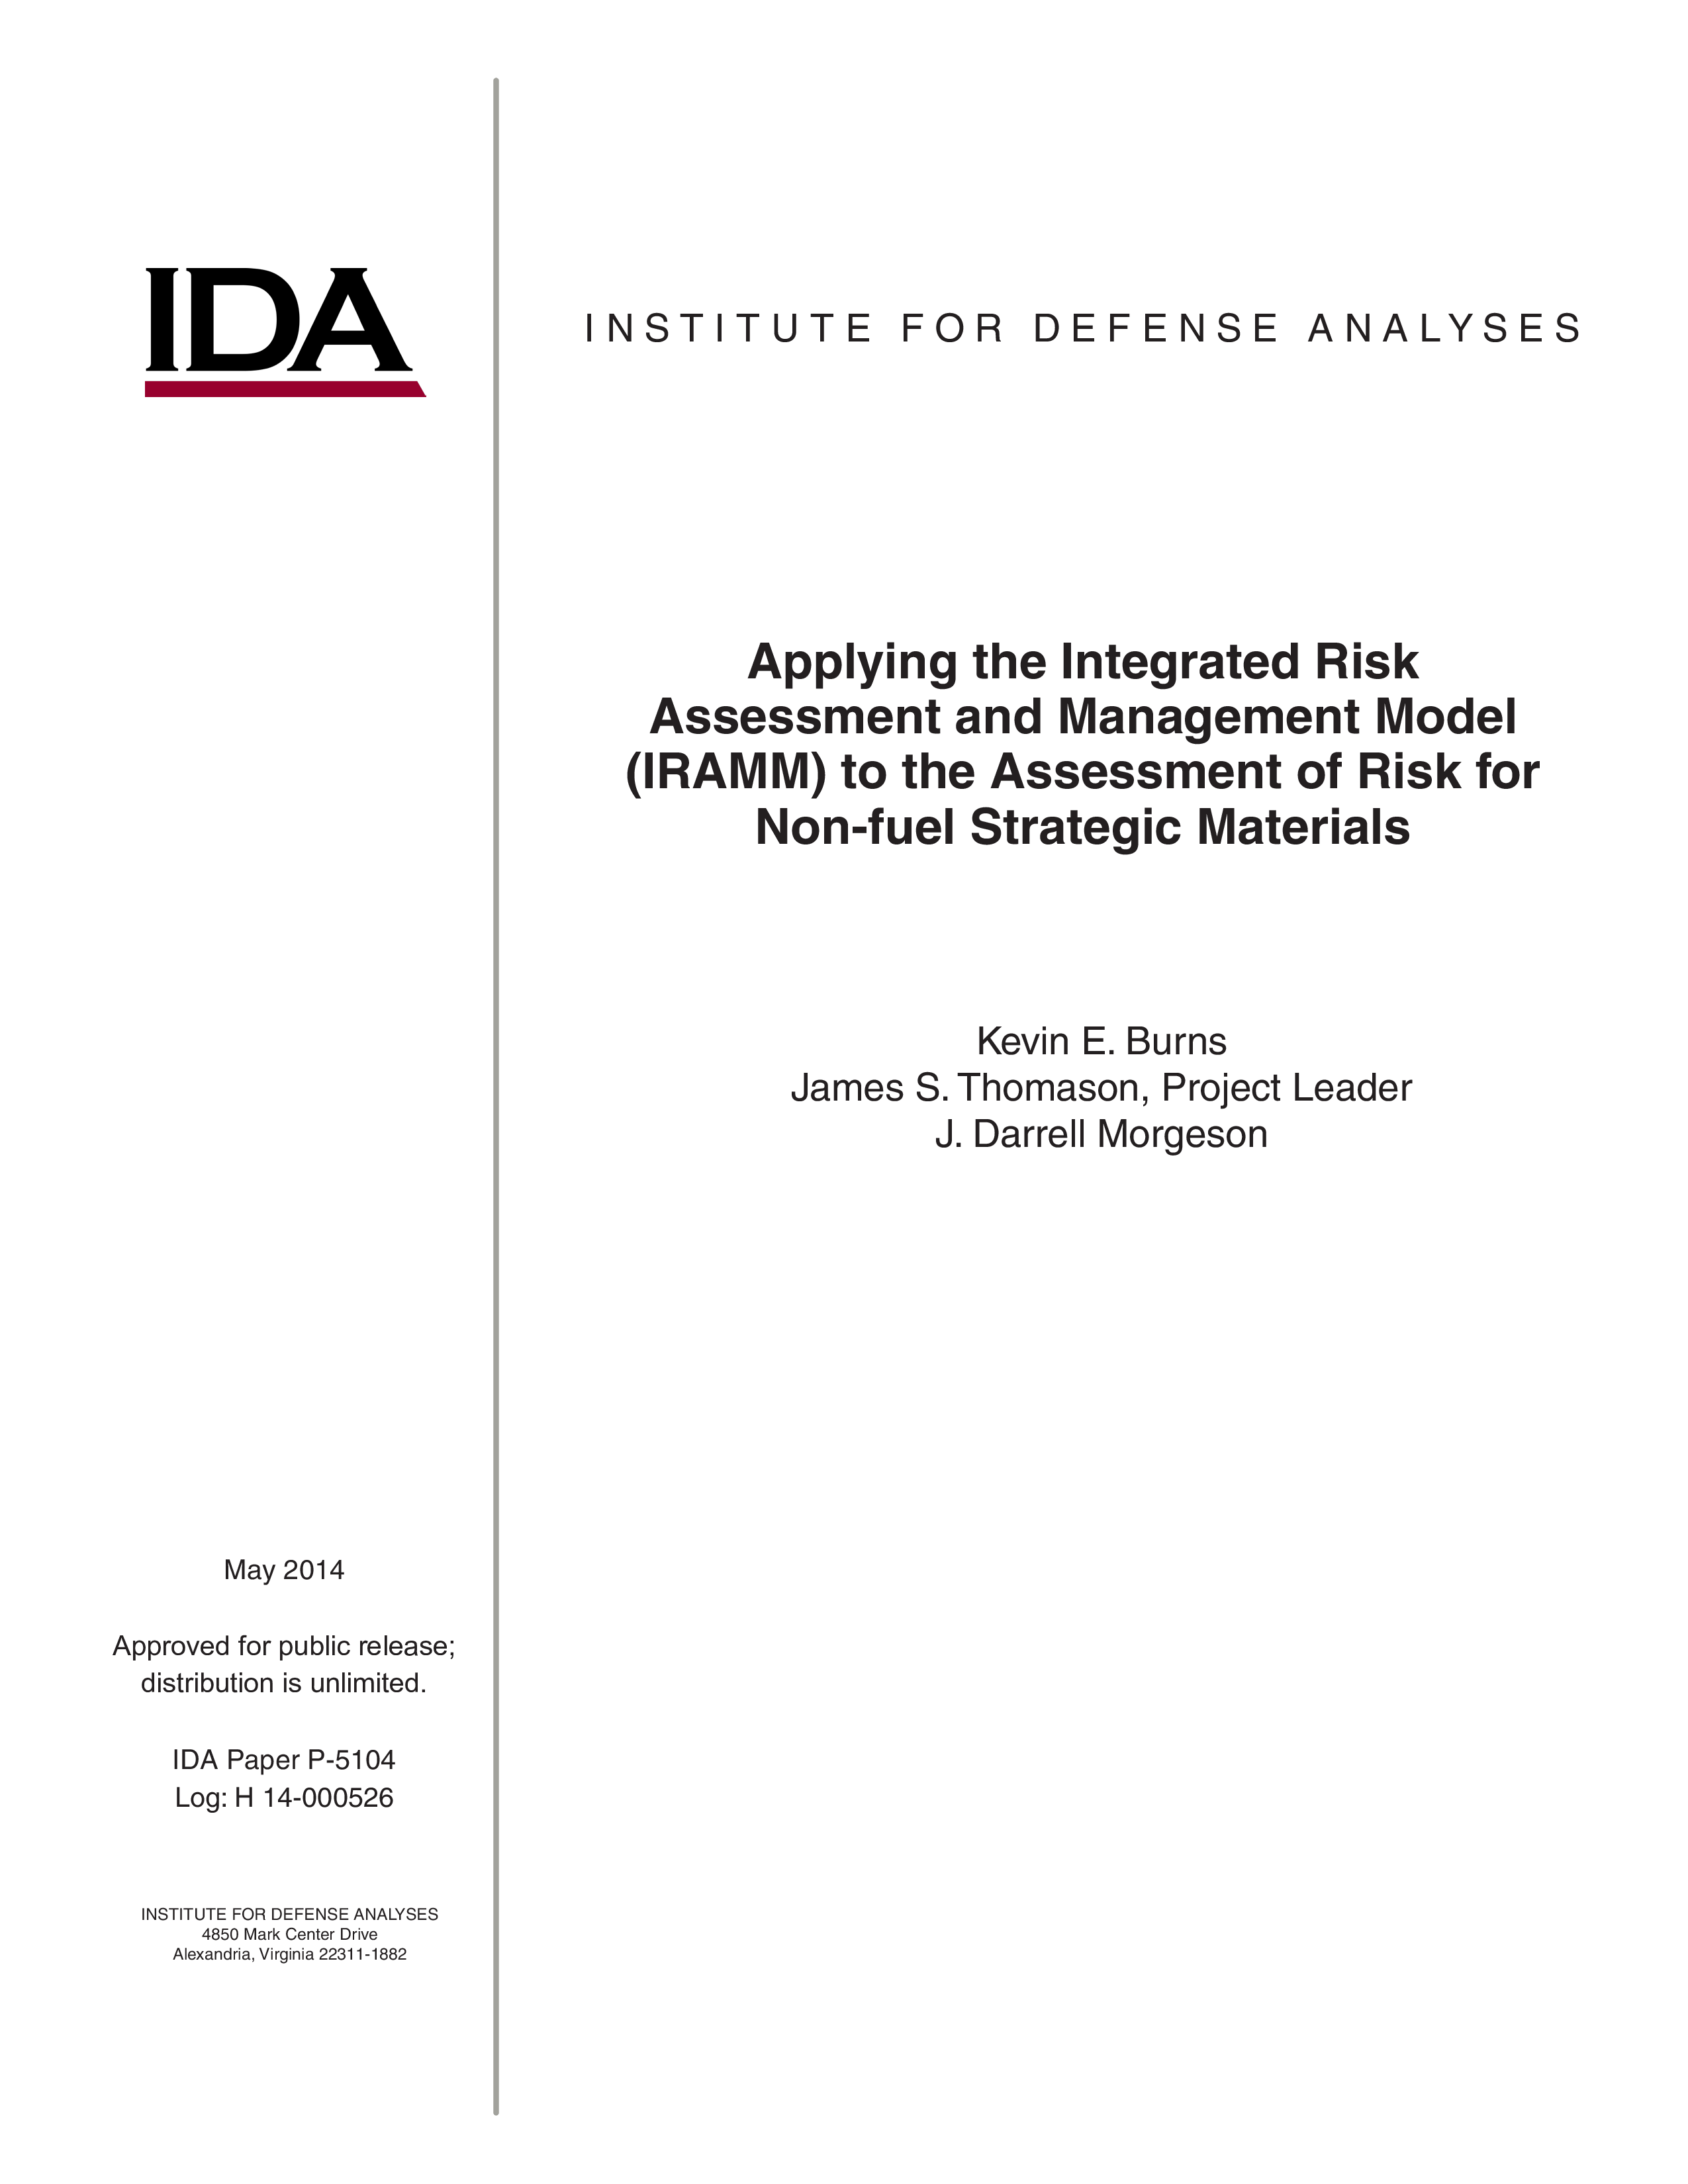 Applying the Integrated Risk Assessment and Management Model (IRAMM) to the Assessment of Risk for Non-fuel Strategic Materials